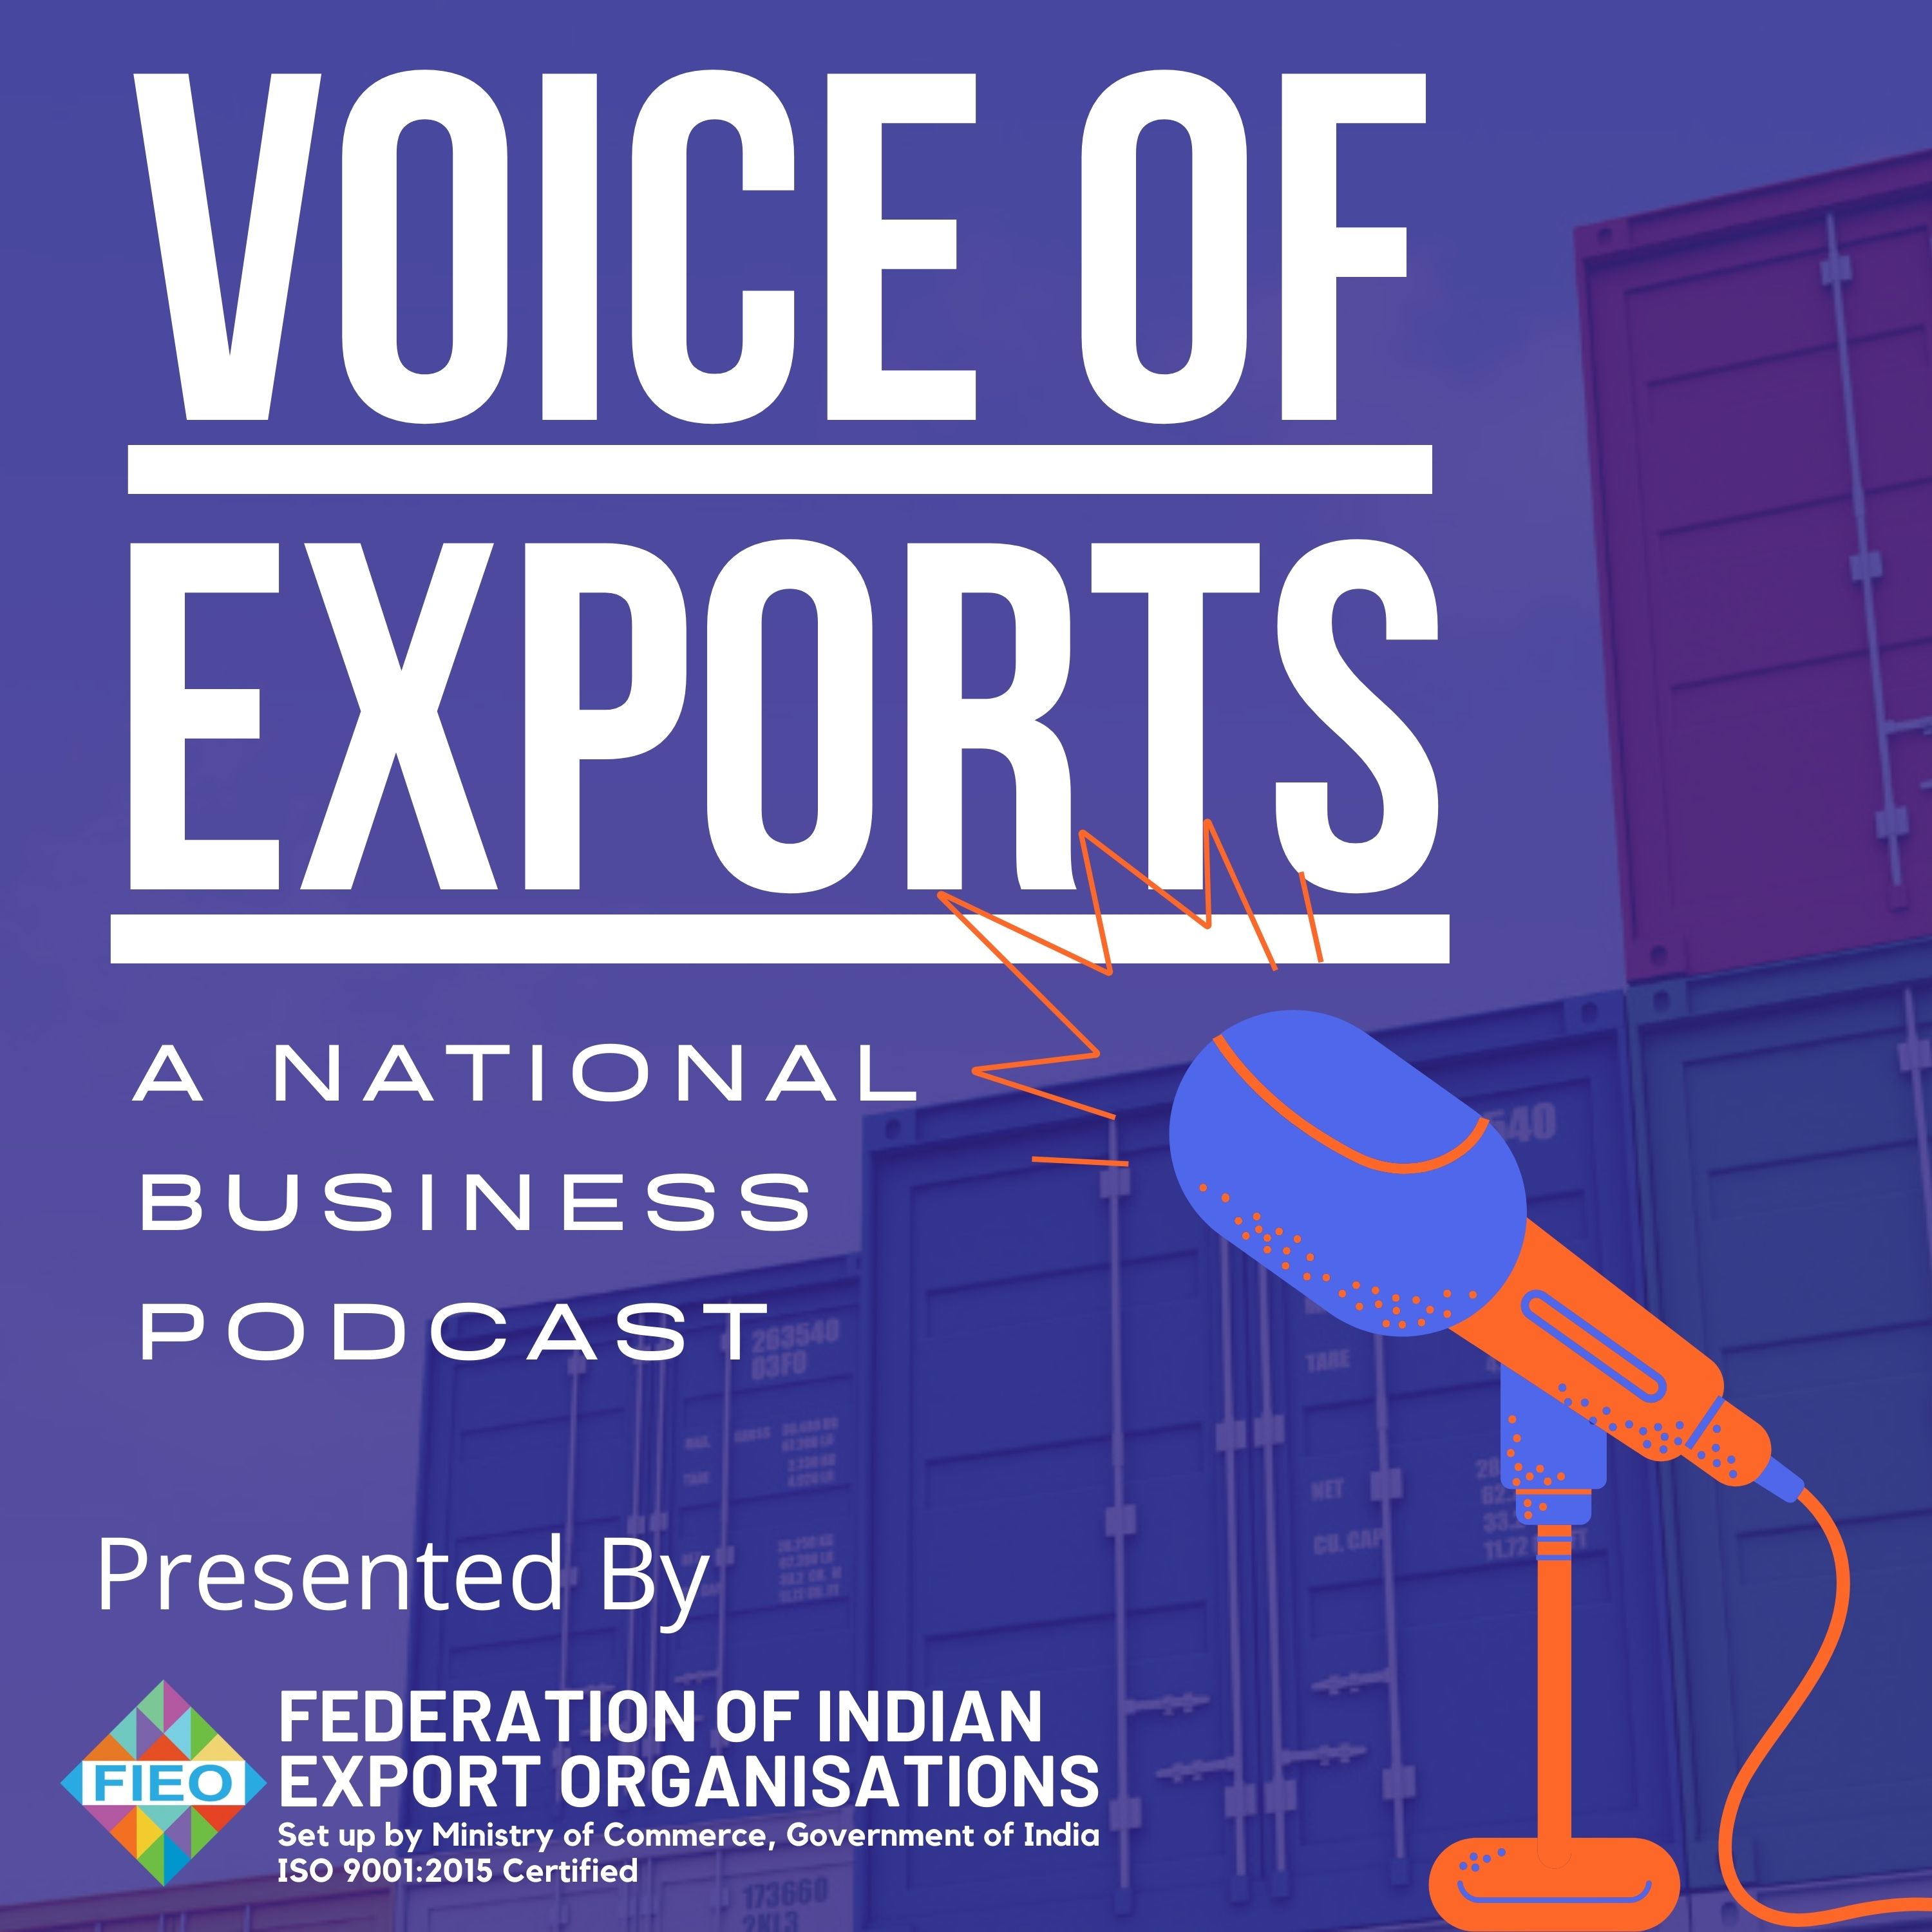 VOICE OF EXPORTS